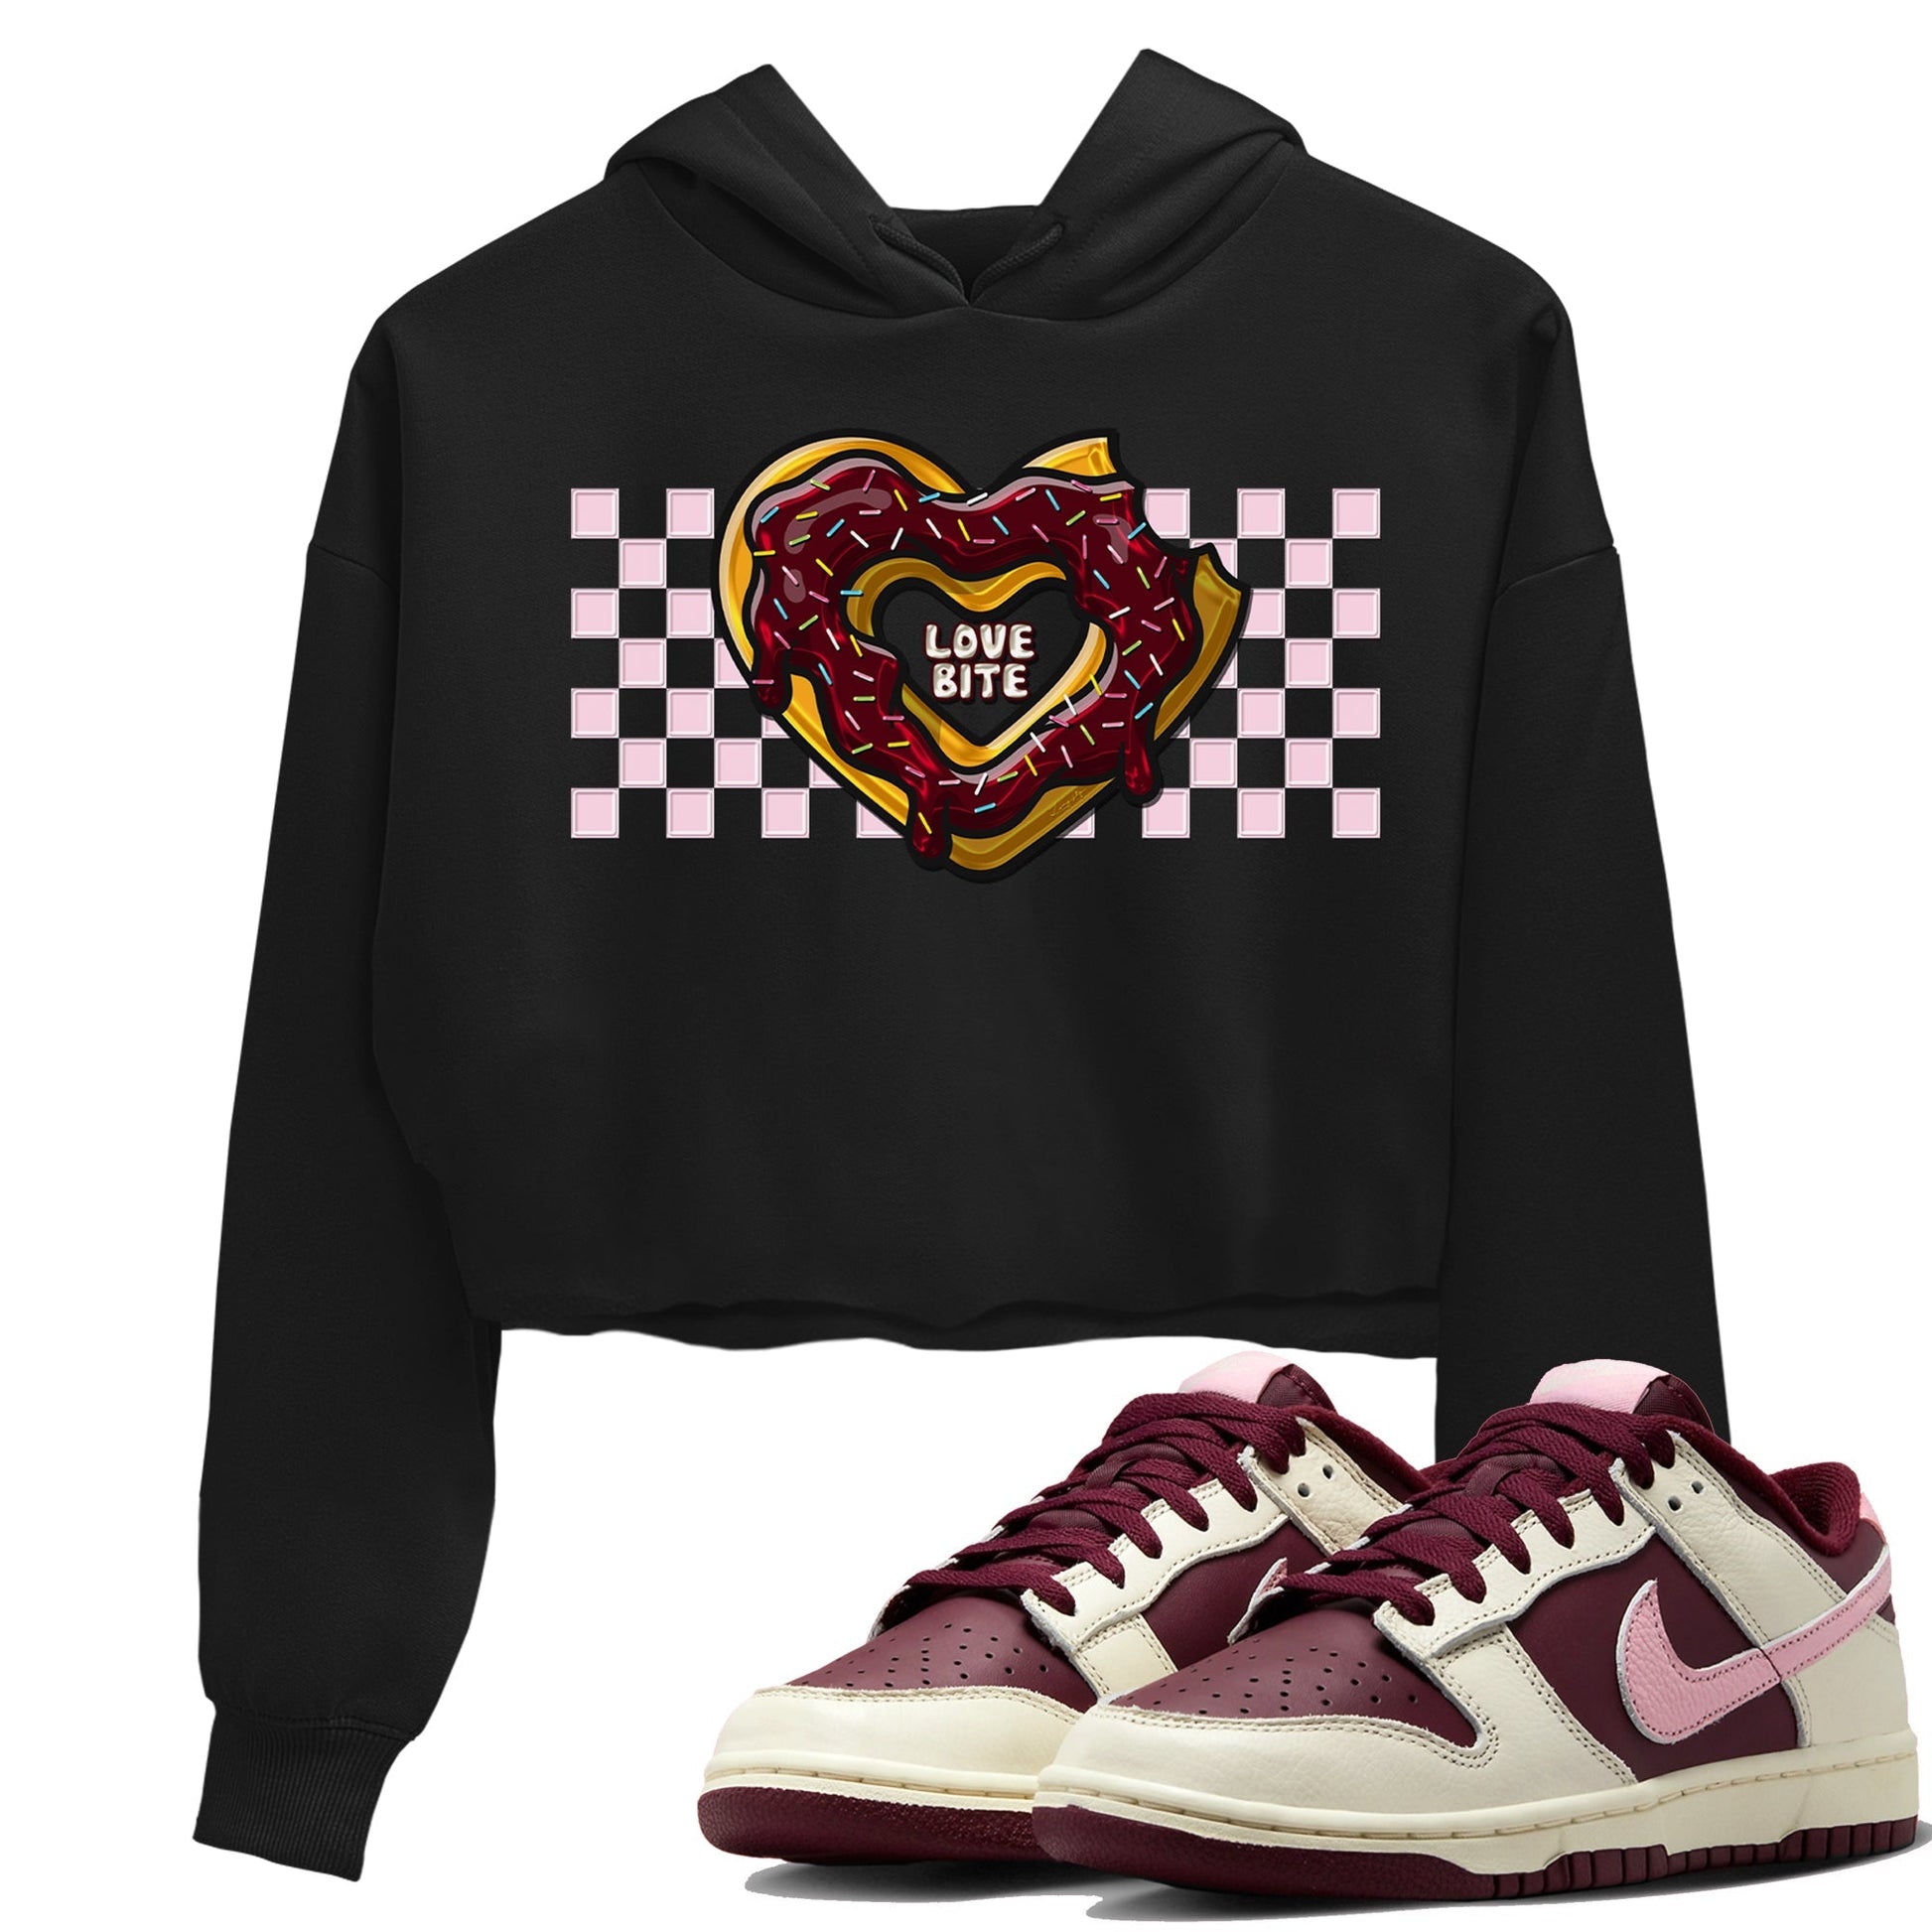 Dunk Valentines Day Sneaker Match Tees Love Bite Sneaker Tees Nike Dunk Valentine's Day Sneaker SNRT Sneaker Tees Women's Shirts